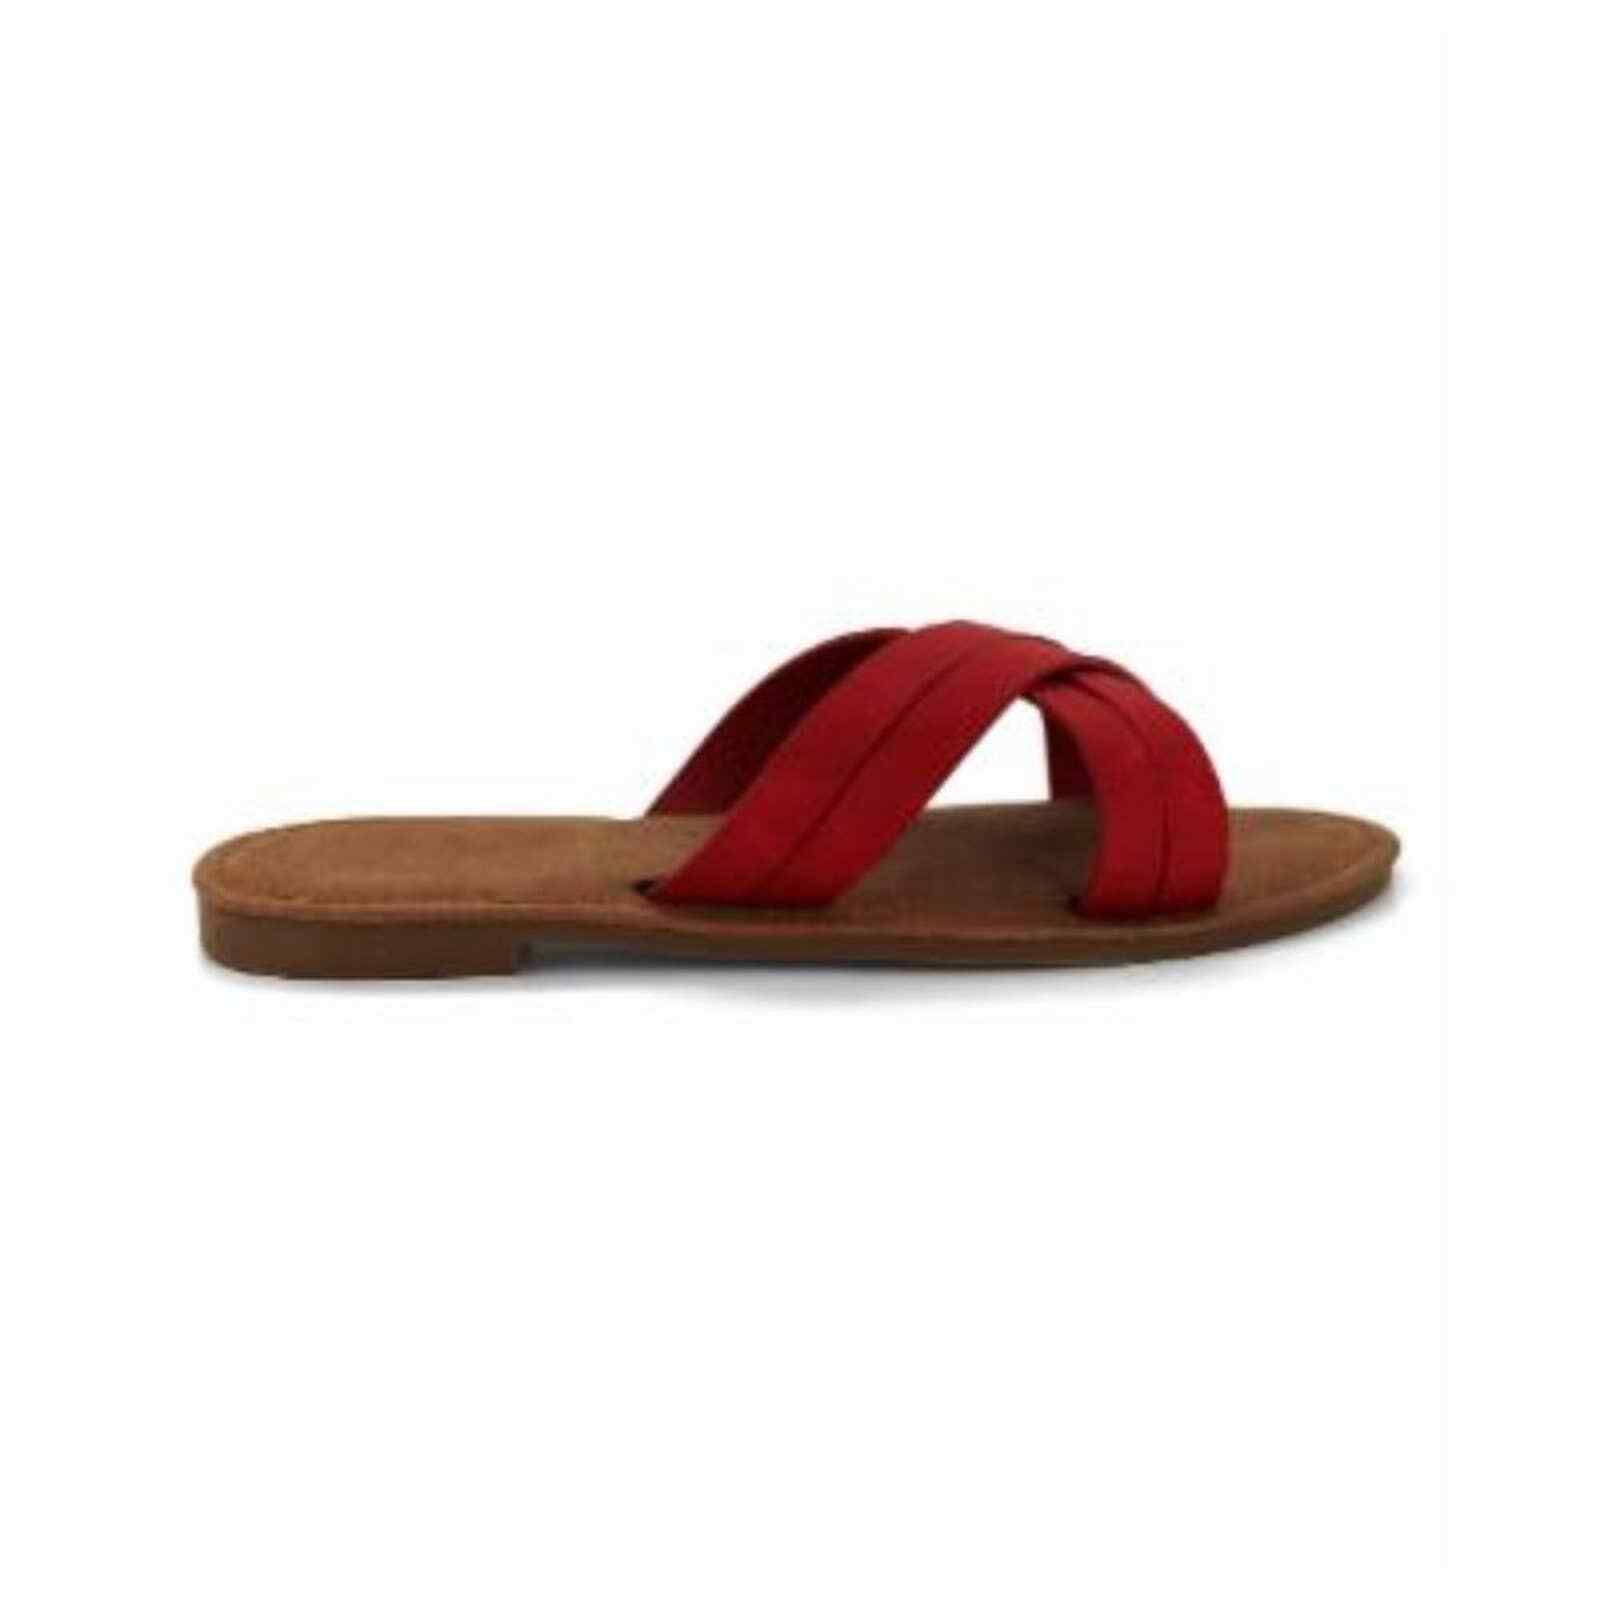 Primary image for Seven7 Red Tia Slide Sandal Sz 9